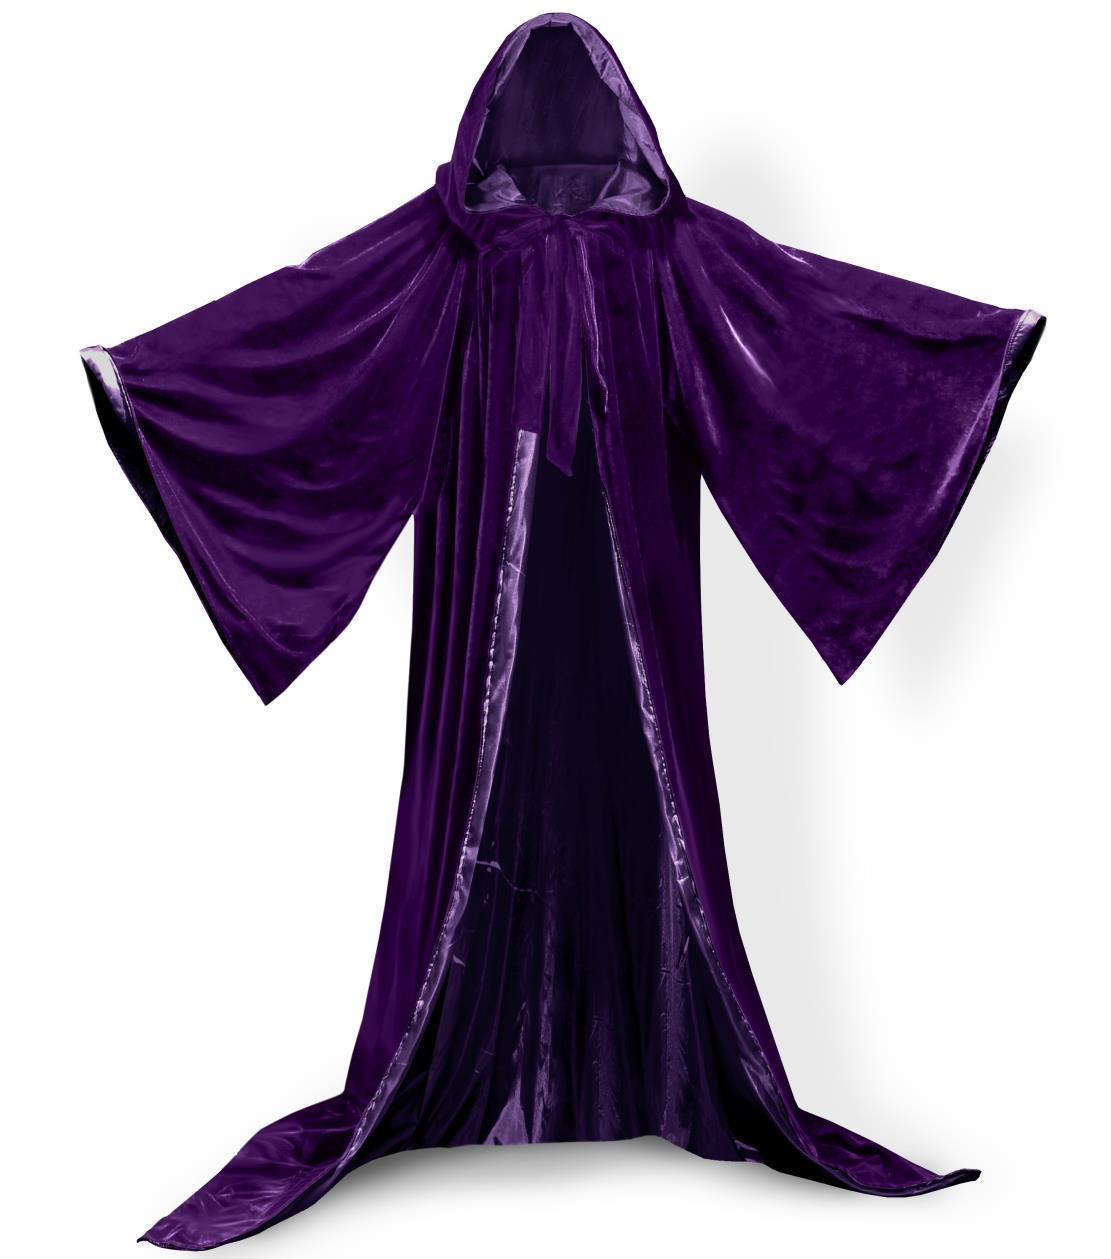 

Long Sleeves Velvet Hooded Cloak Hooded Velvet Cloak Gothic Wicca Robe Medieval Witchcraft Larp Cape Hooded Vampire Cape Halloween Party Clo, Purple + black lining